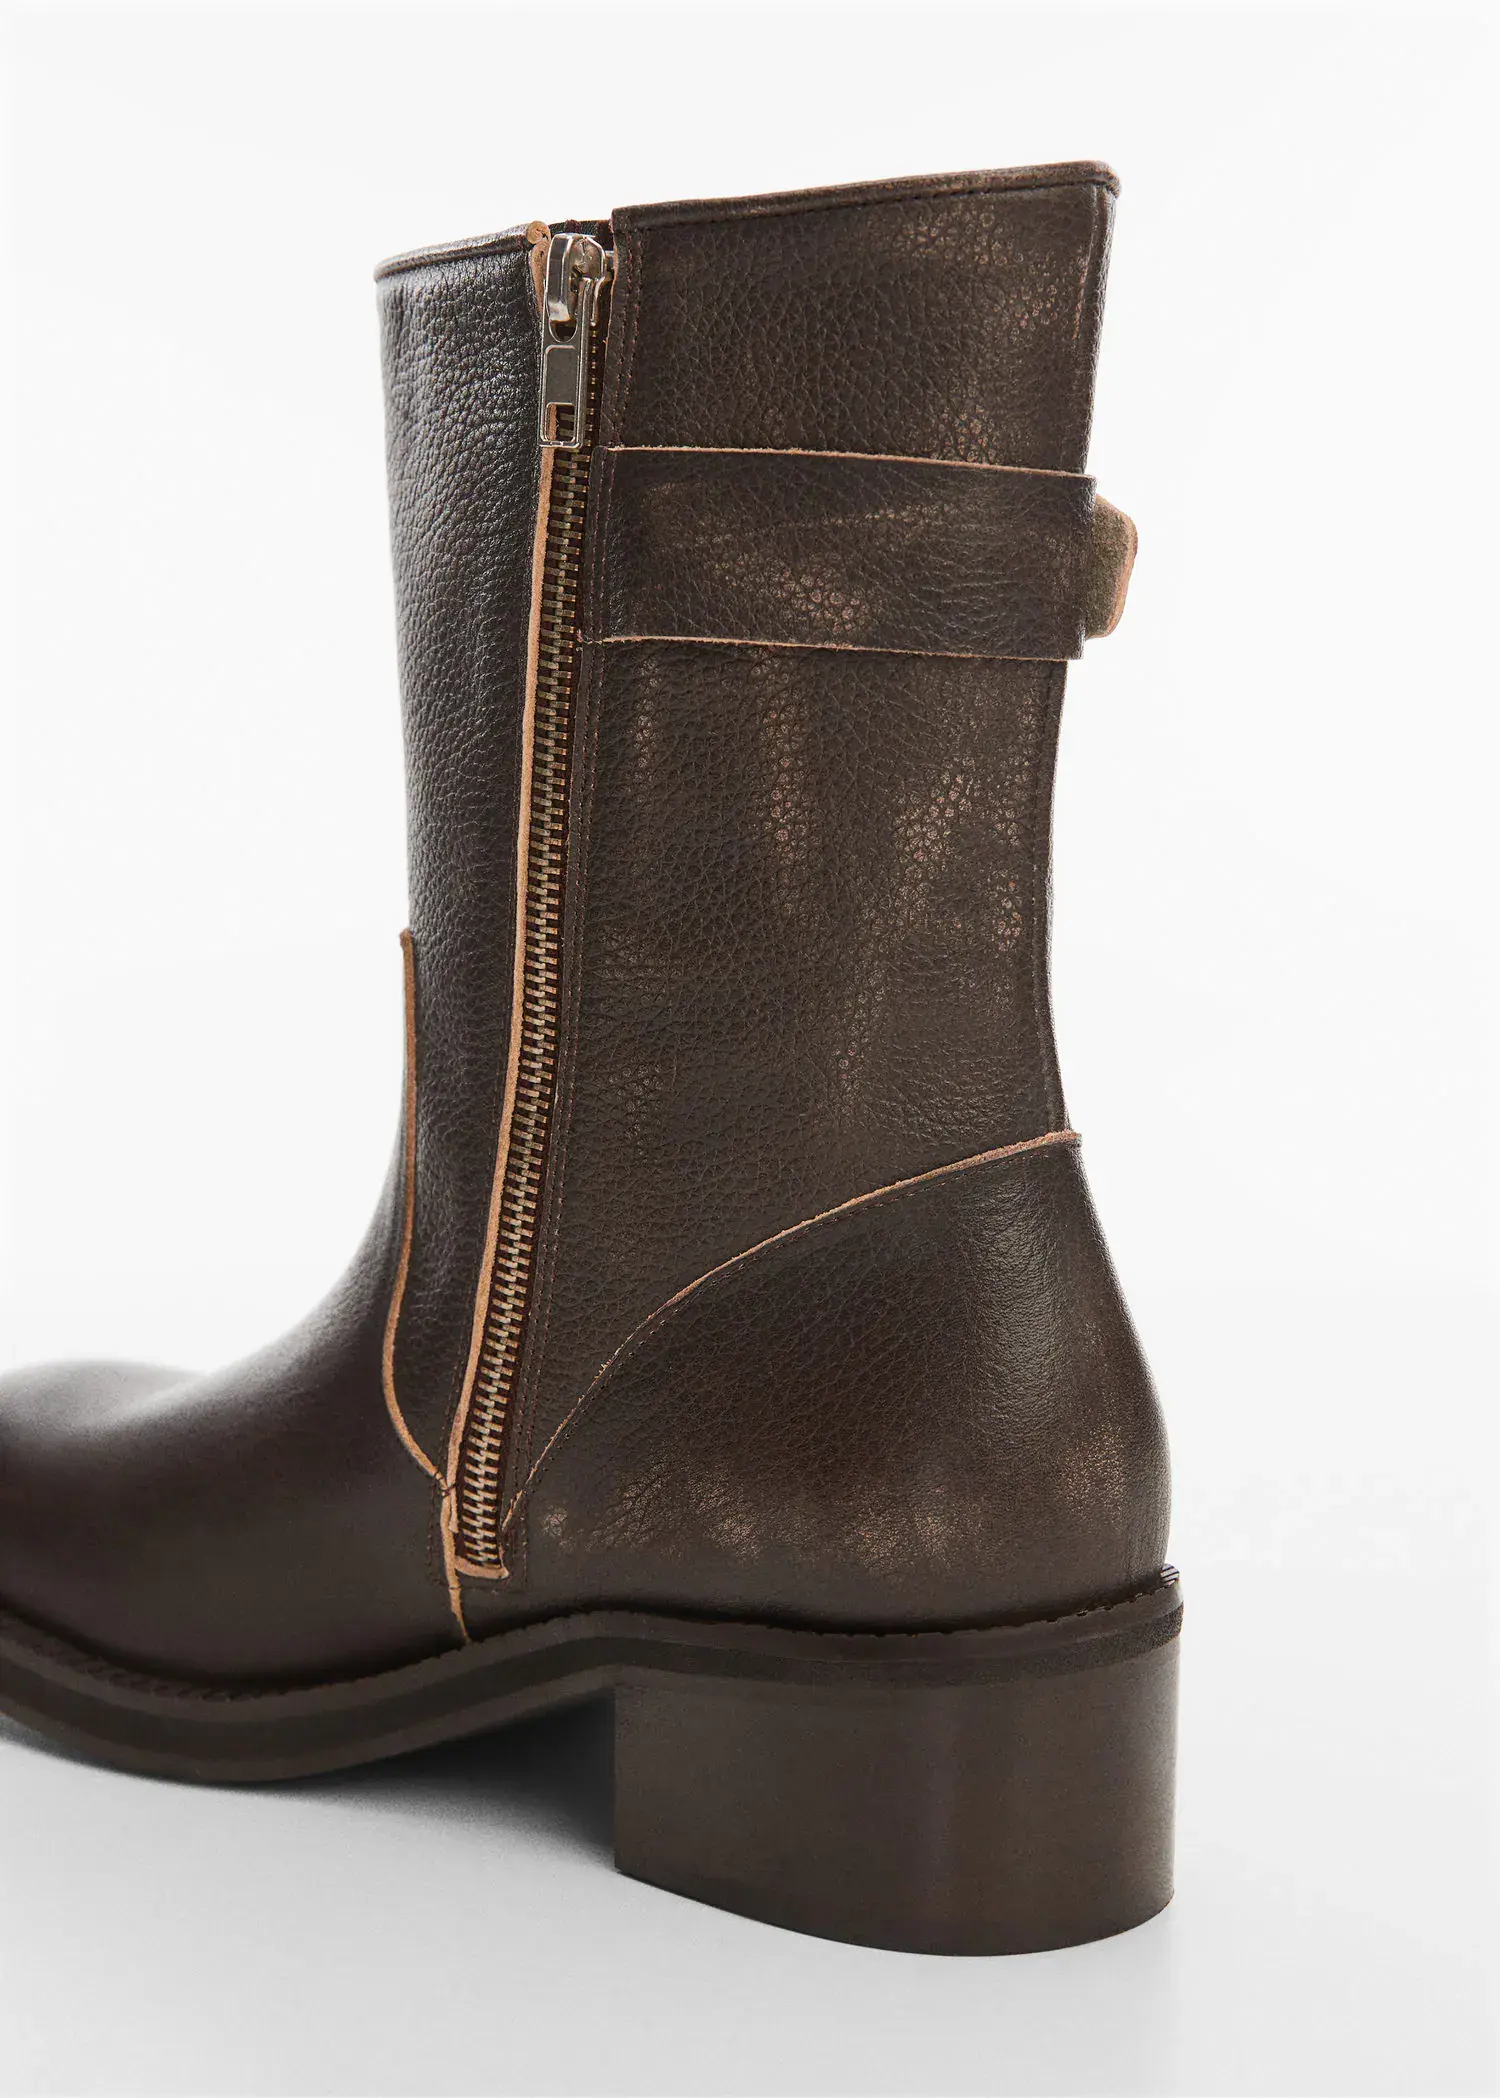 Mango Leather biker ankle boots. 3